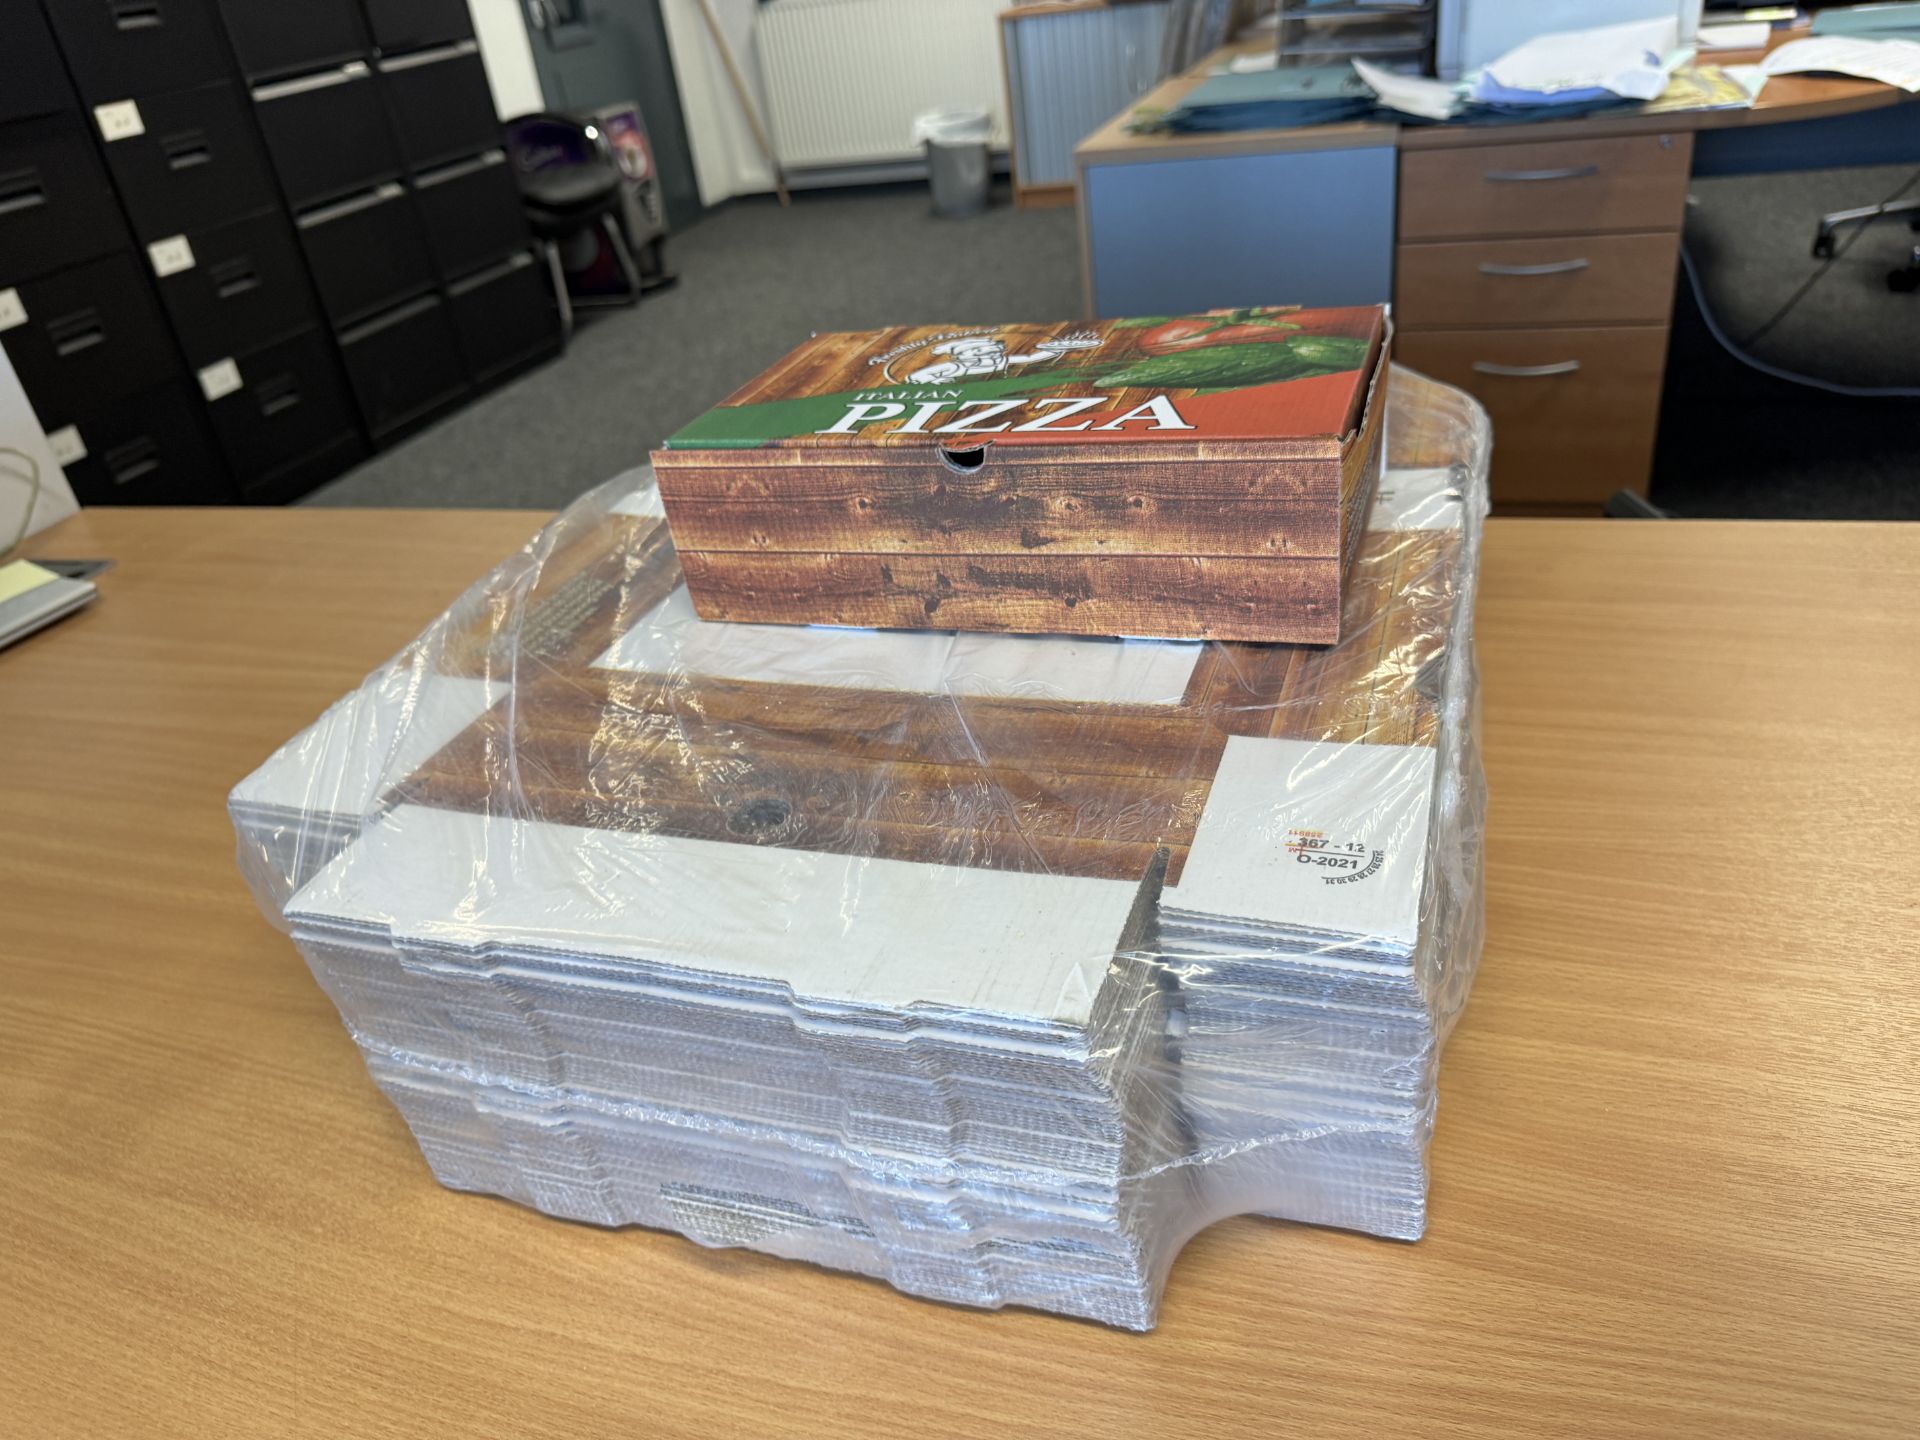 Circa 900 - Italian Pizza Calzone Boxes (Cardboard) - Multiple Uses RRP £130 - Image 11 of 13